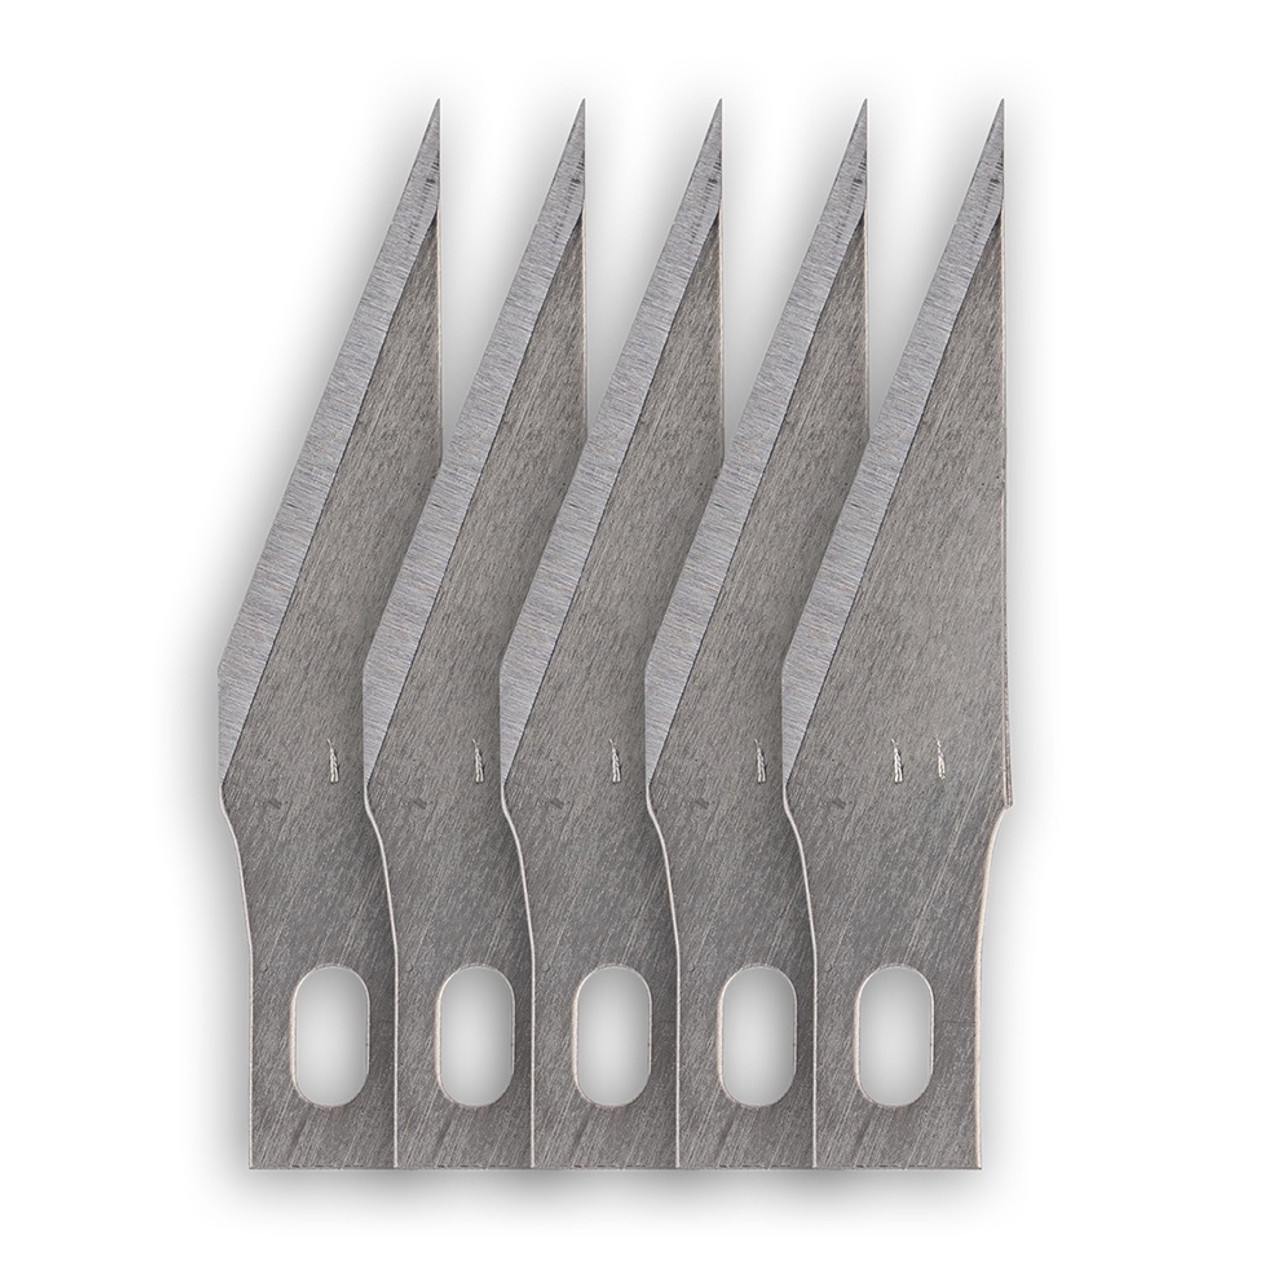 Hobby Knife with five #11 Blades